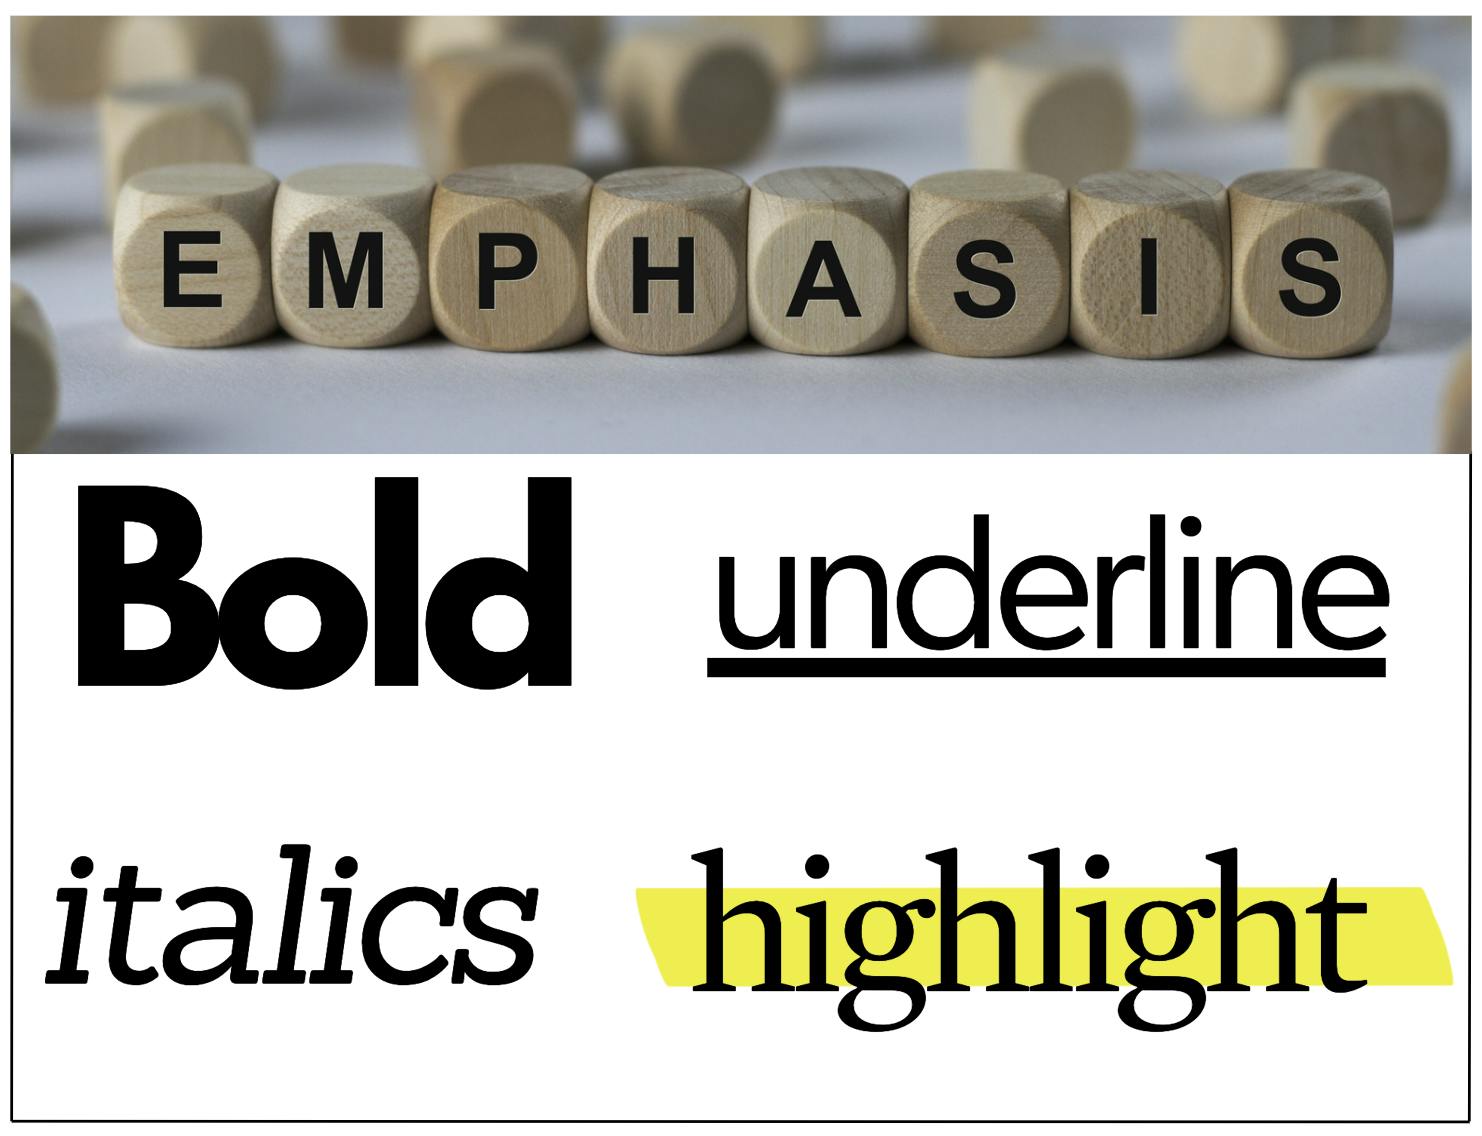 the word "emphasis" is the title of this image. Under it are the words bold, underline, italics, and highlight